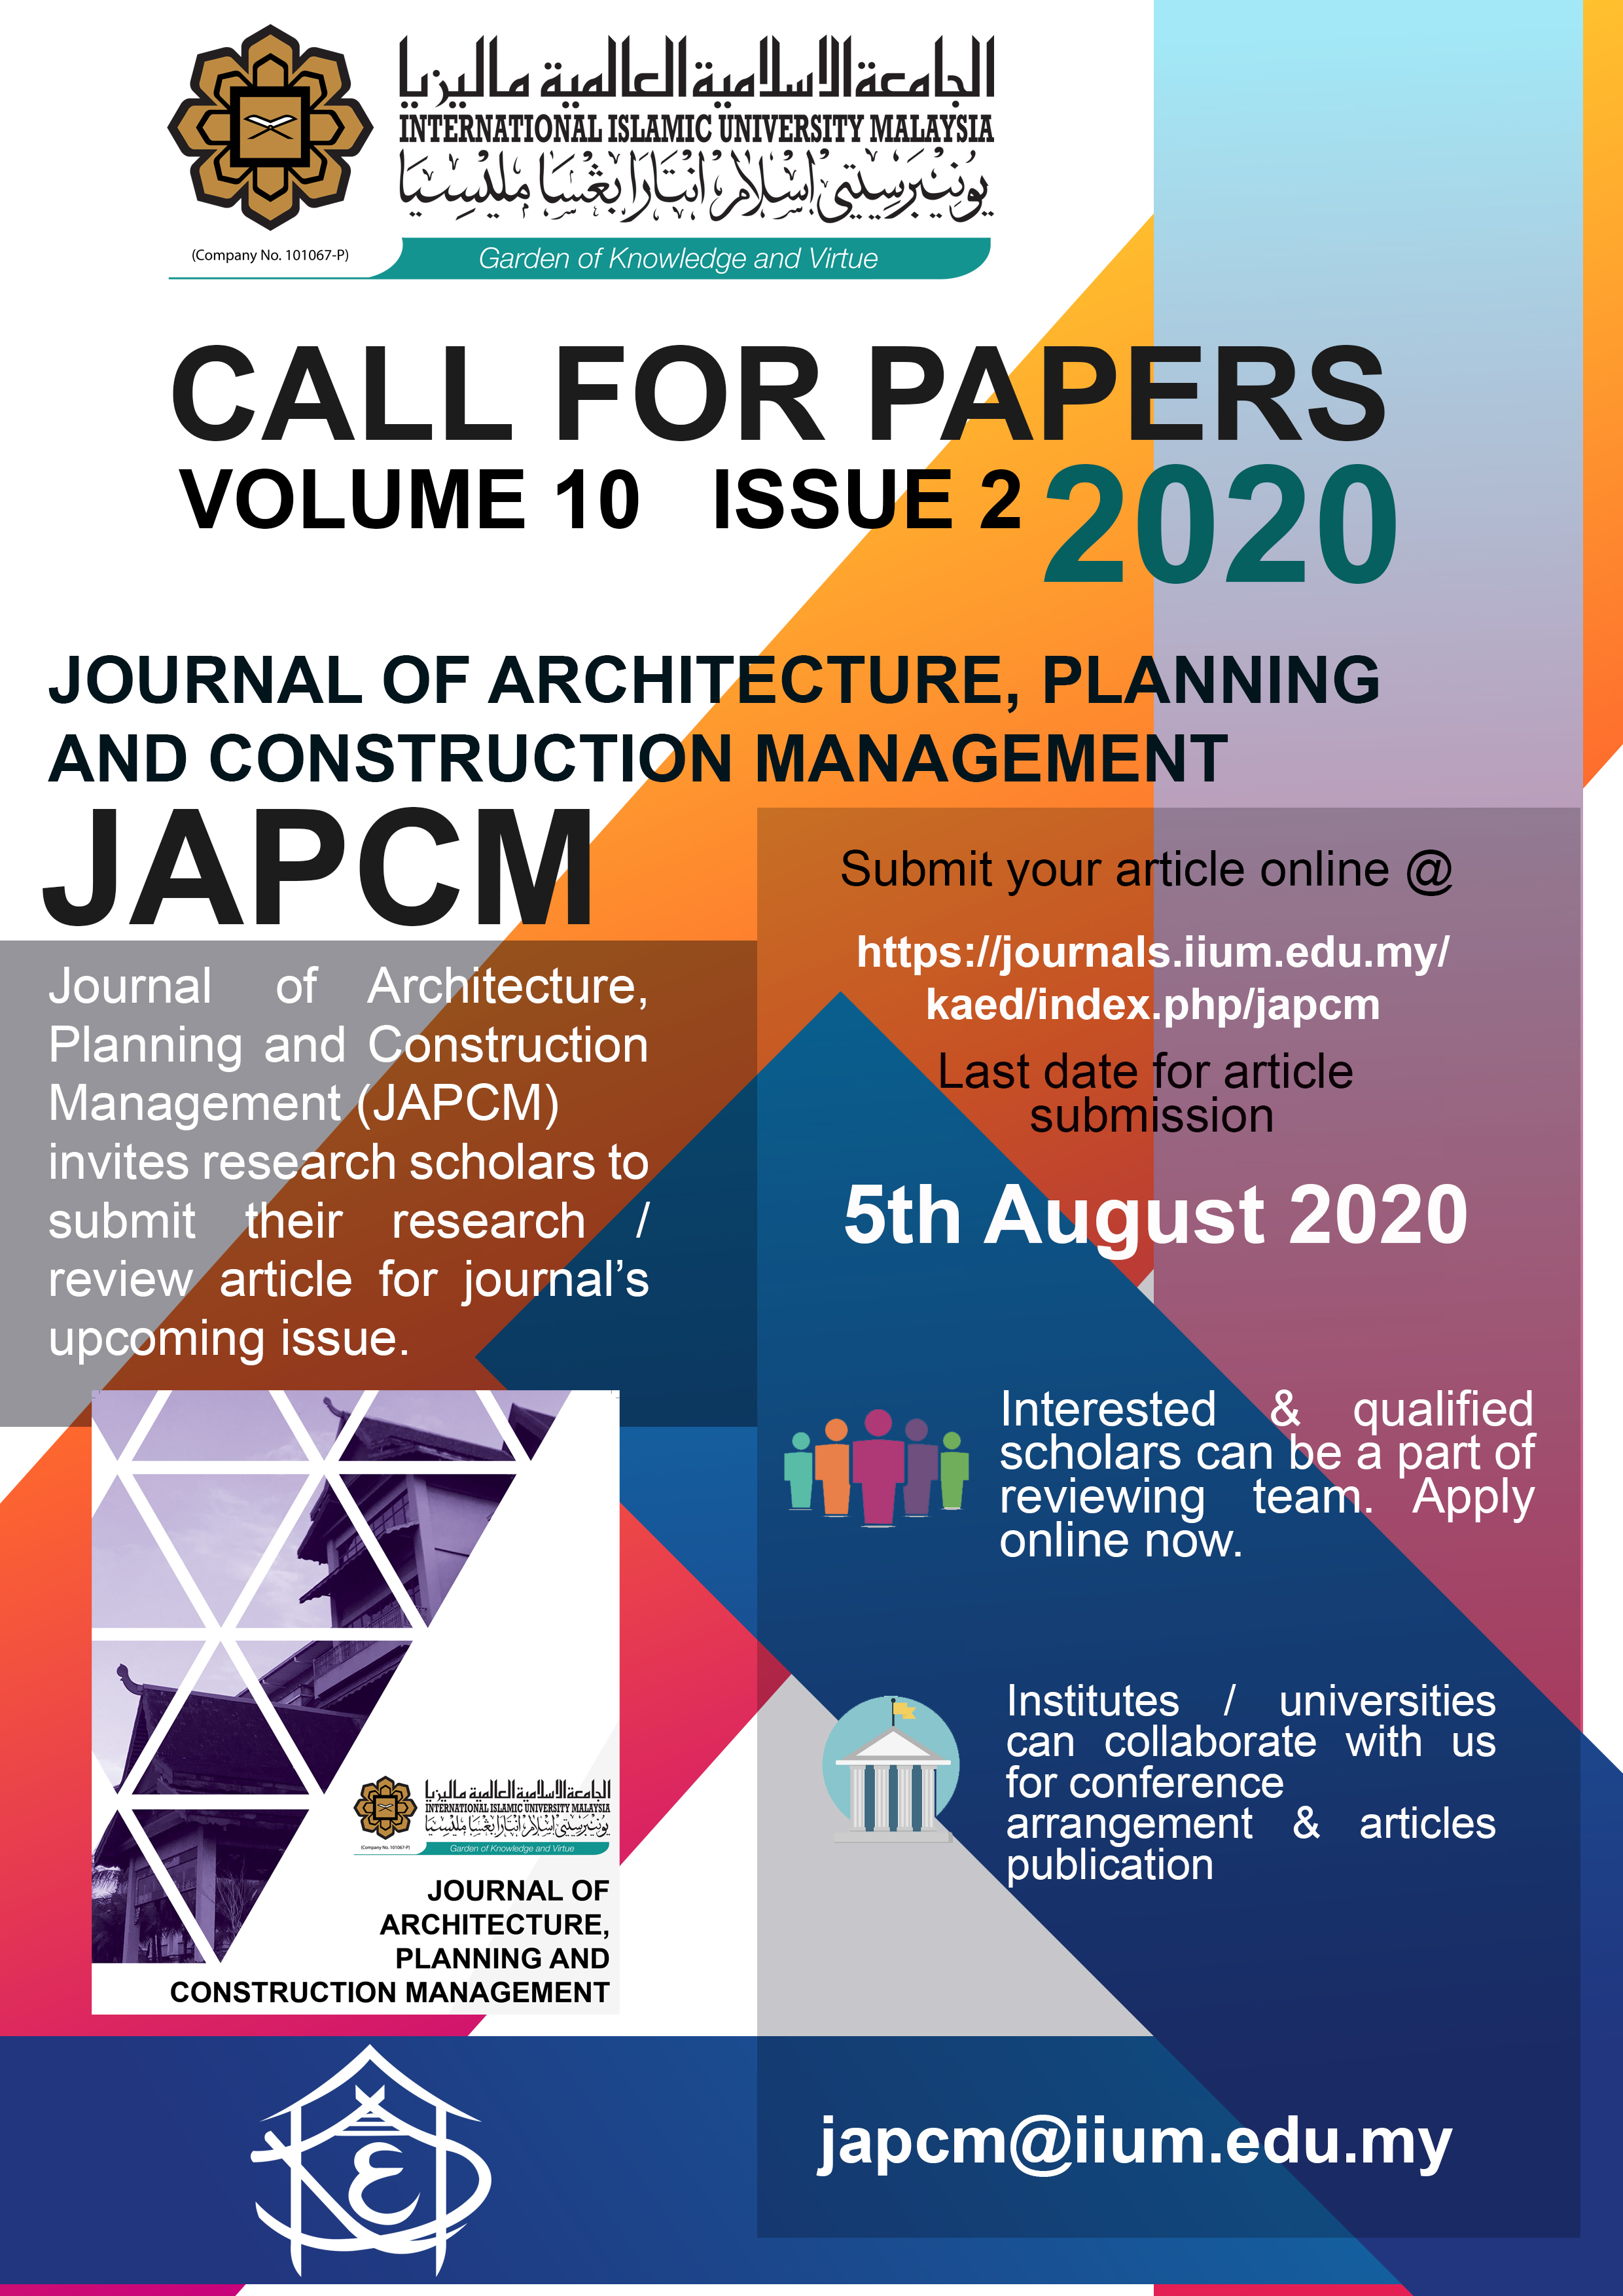 Call for Papers Volume 10, Issue 2, 2020